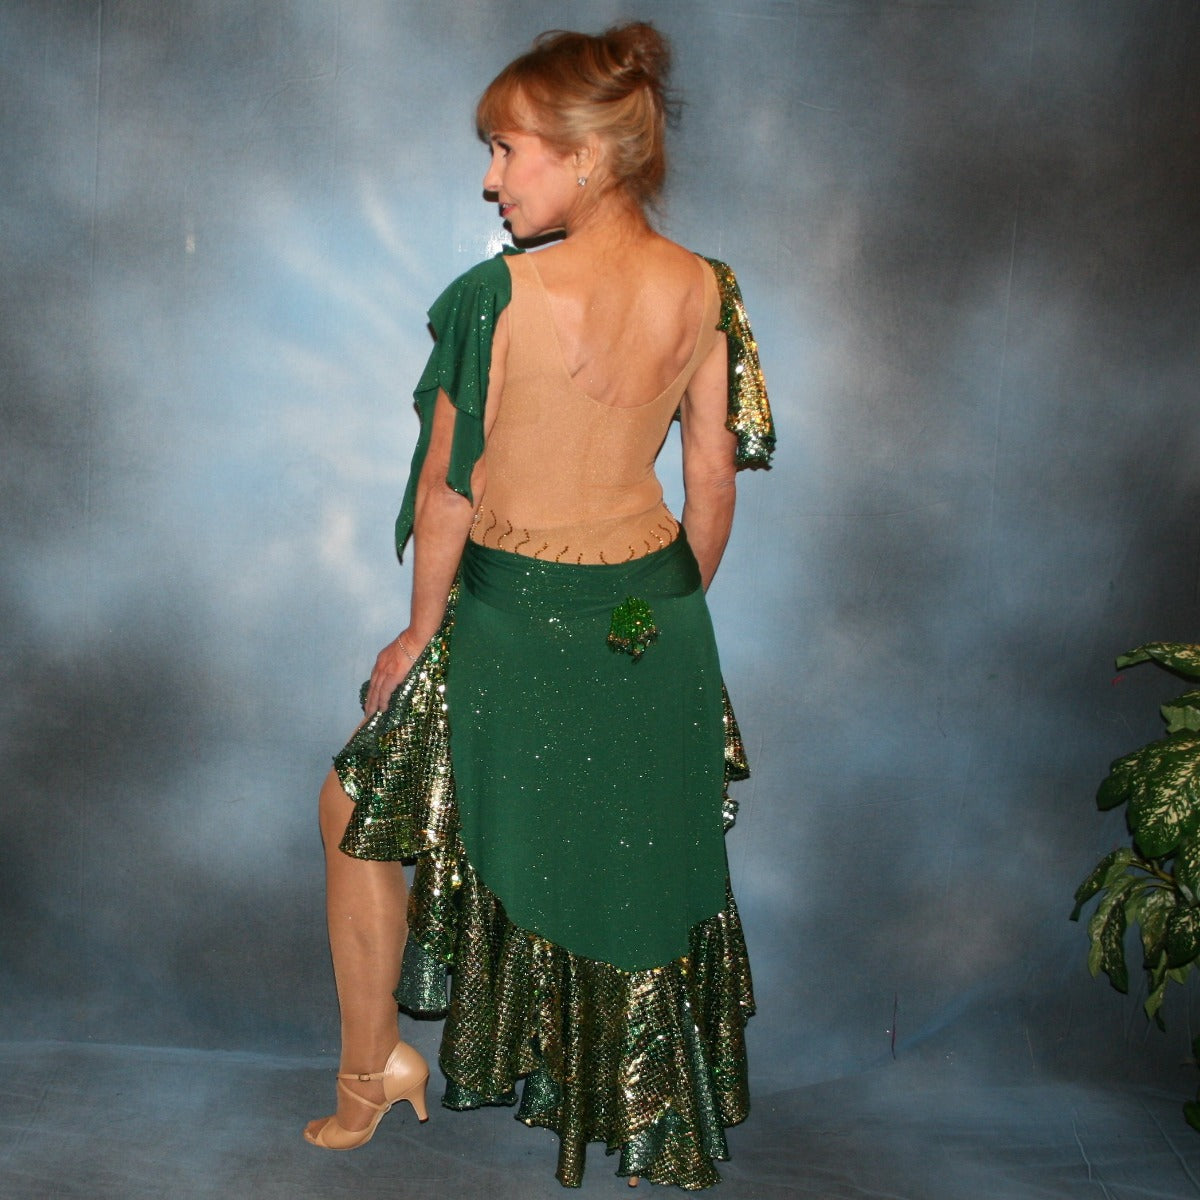 Crystal's Creations back view of Green Latin/rhythm dress was created on a nude illusion base of deep emerald green glitter slinky fabric along with flounces & accents of rich emerald green & gold tropical print sequin fabric, embellished with gold aurum Swarovski stonework plus hand beaded detailing.